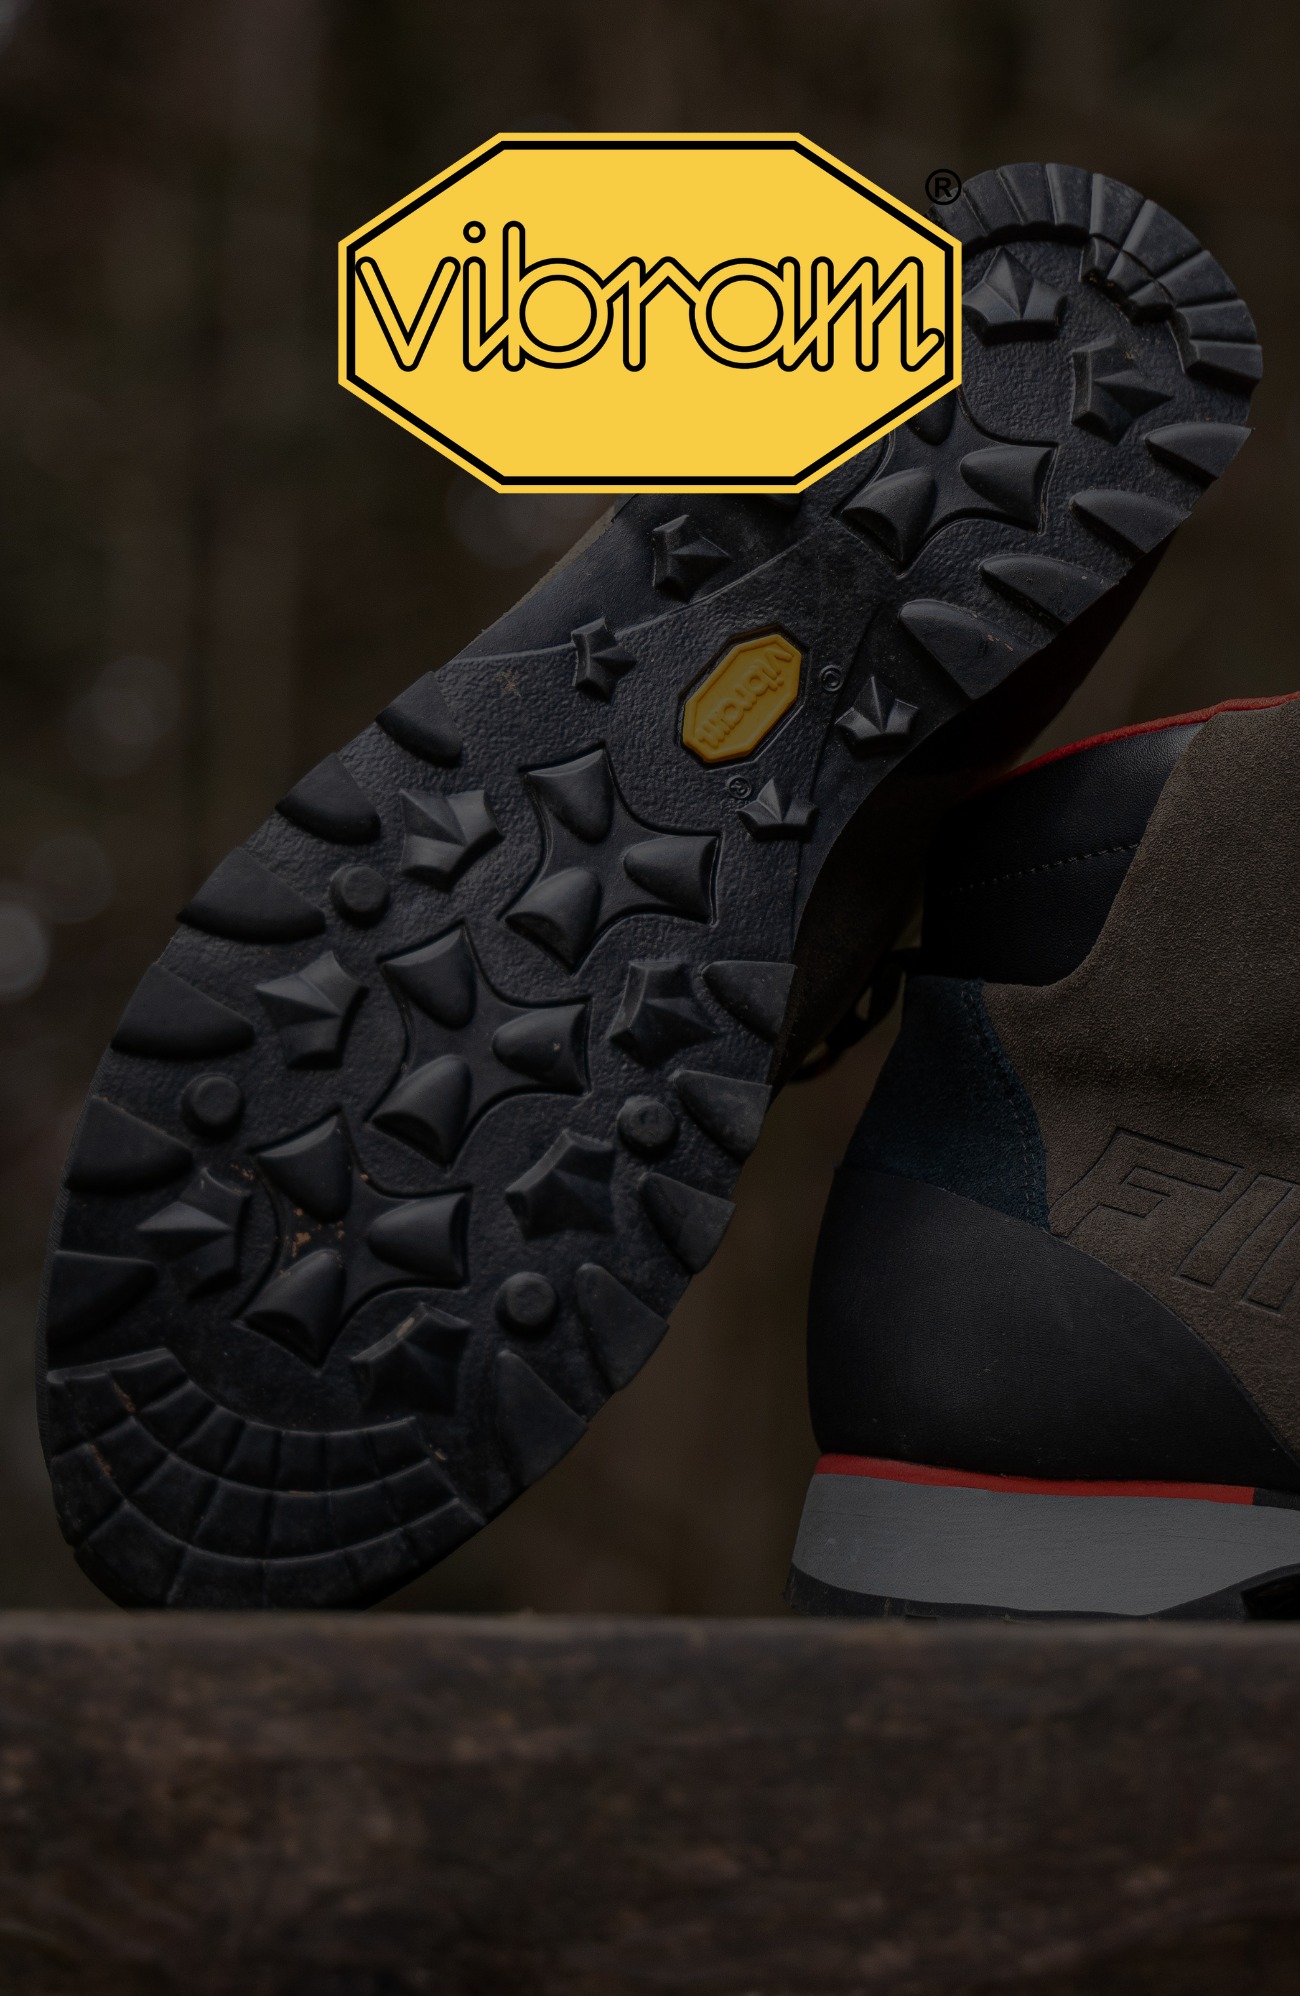 VIBRAM®: This popular brand is a guarantee of firm footing in pleasant and challenging conditions